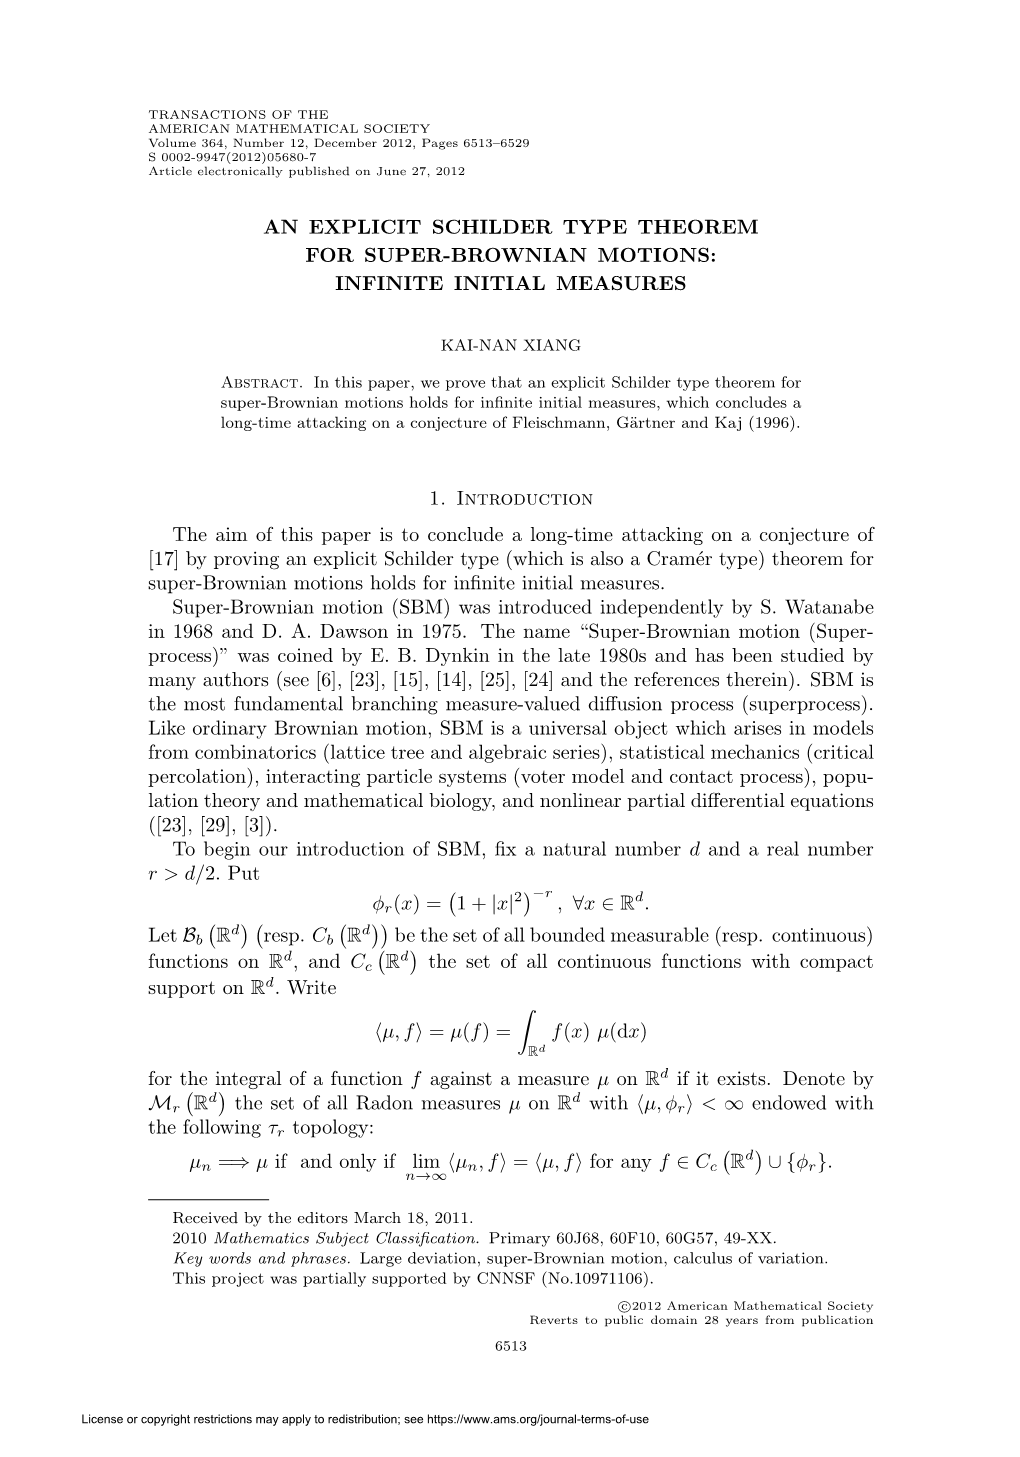 An Explicit Schilder Type Theorem for Super-Brownian Motions: Infinite Initial Measures